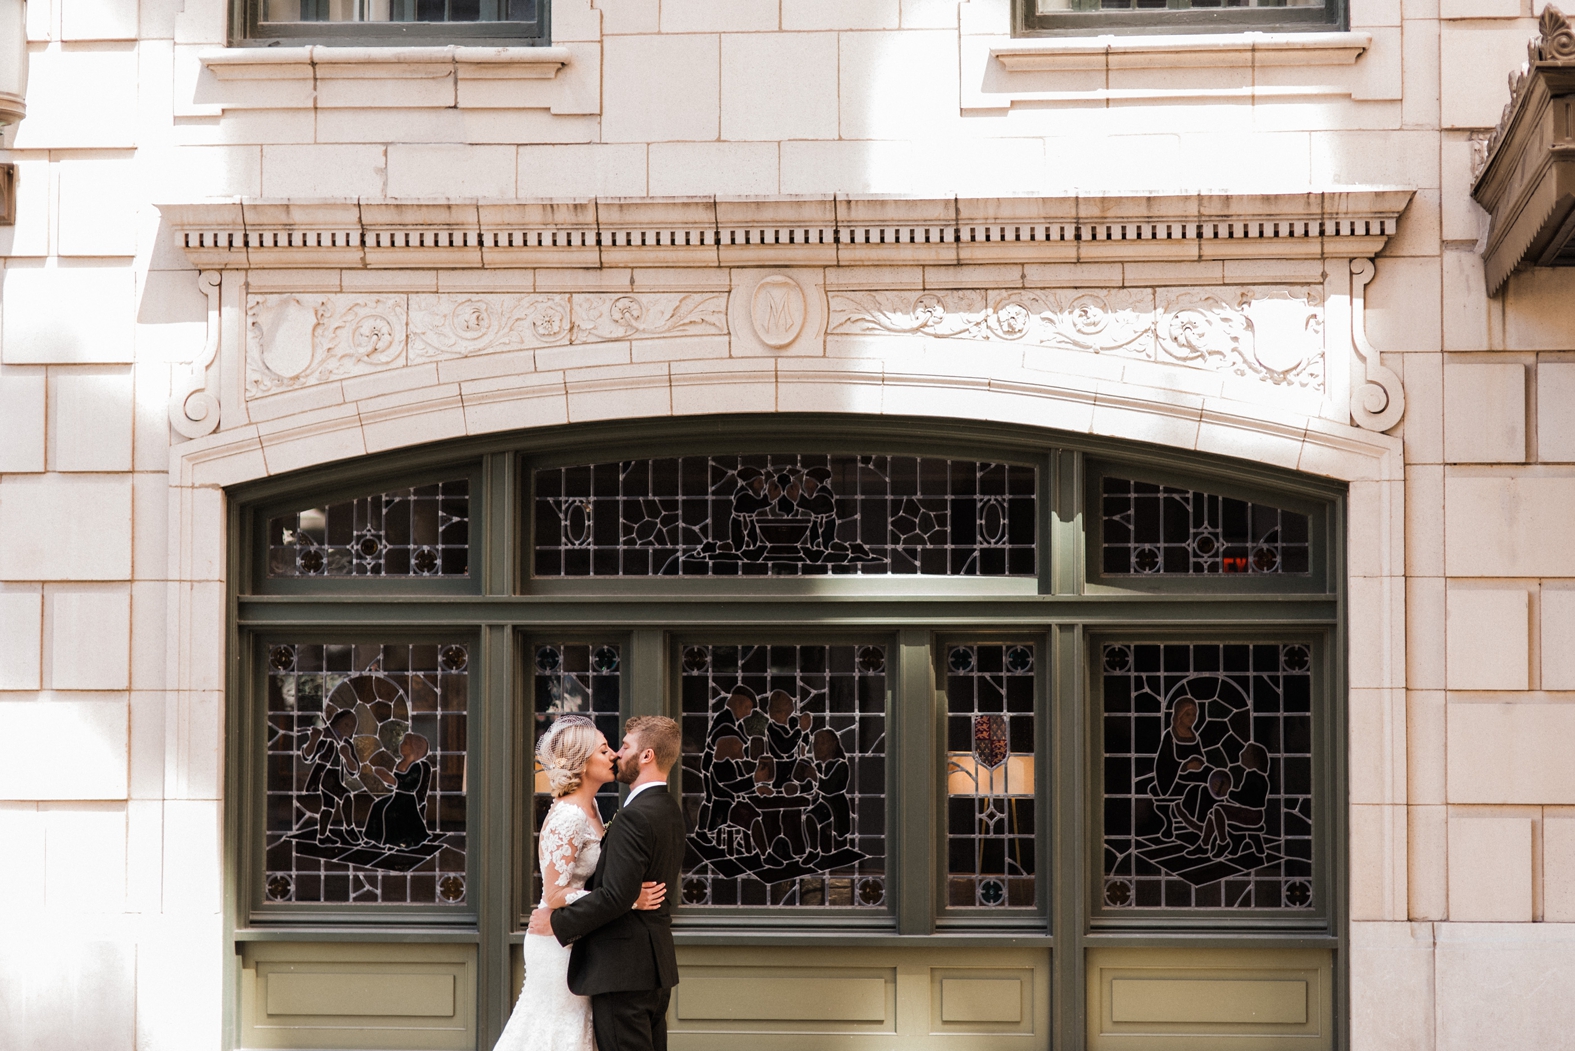 Bride in lace long sleeve wedding dress and birdcage veil; groom in olive green suit kissing in front of stained glass window